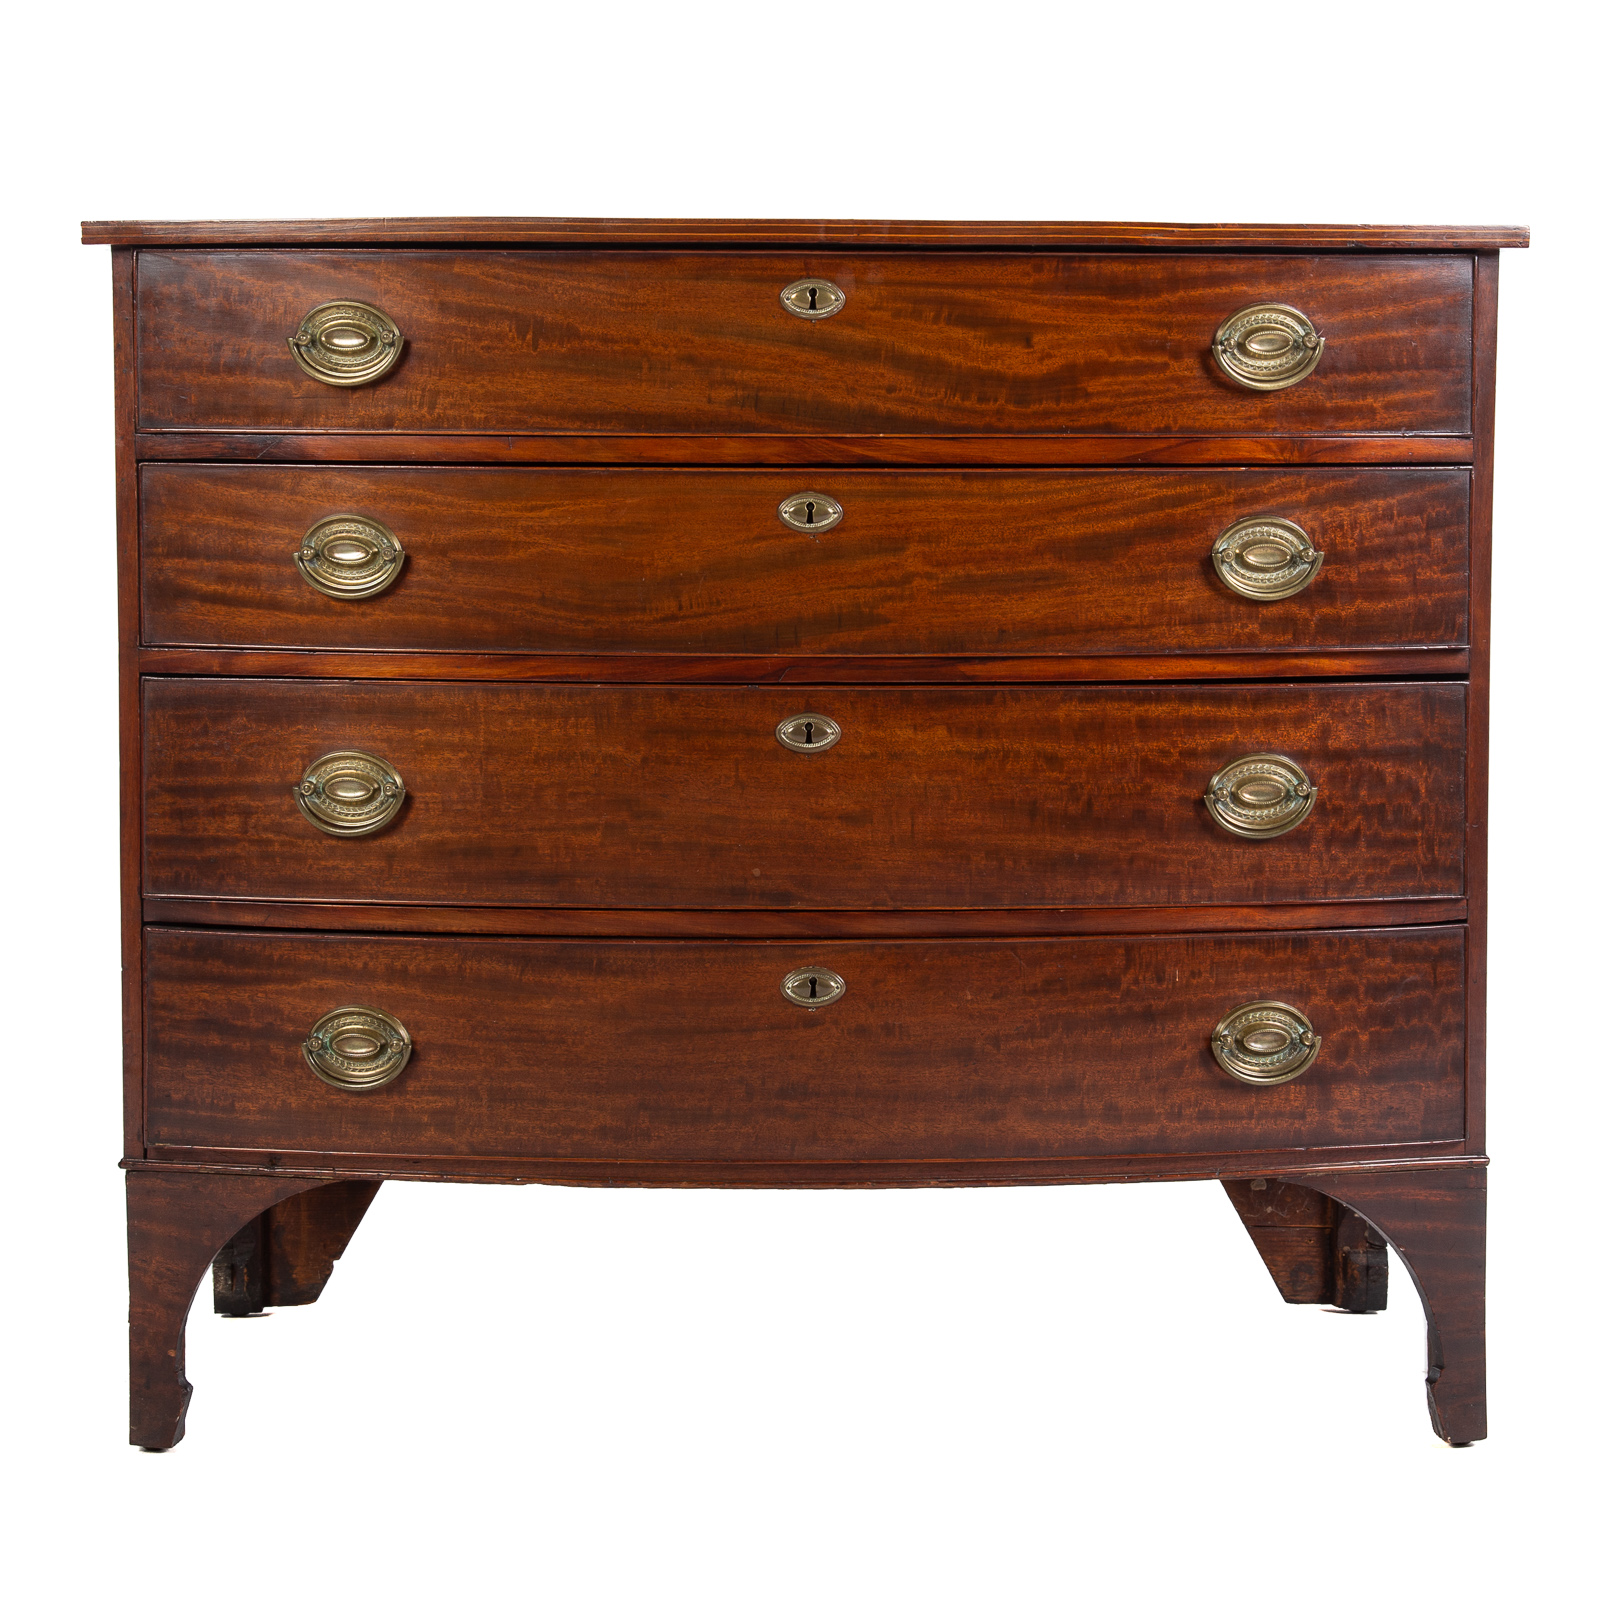 FEDERAL MAHOGANY BOWFRONT CHEST 2872df